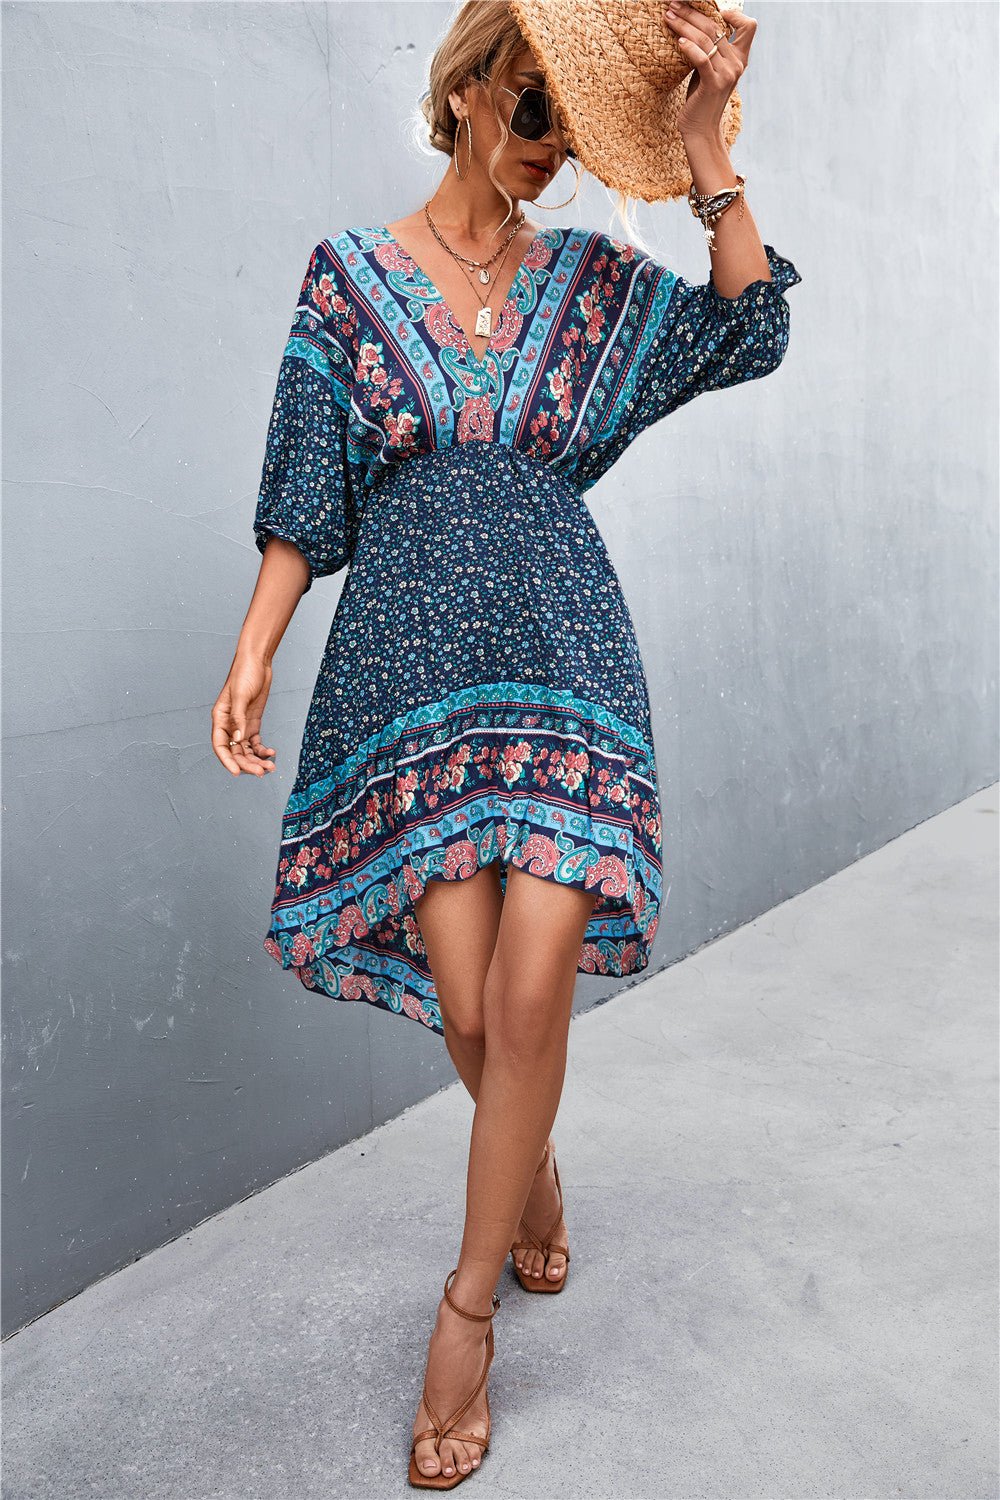 Bohemian Dreams - Indulge in the Art of Romance with our Printed V Neck Dress - Feel Like a Goddess, Embrace Your Inner Sultriness and Experience Unparalleled Comfort. - Guy Christopher